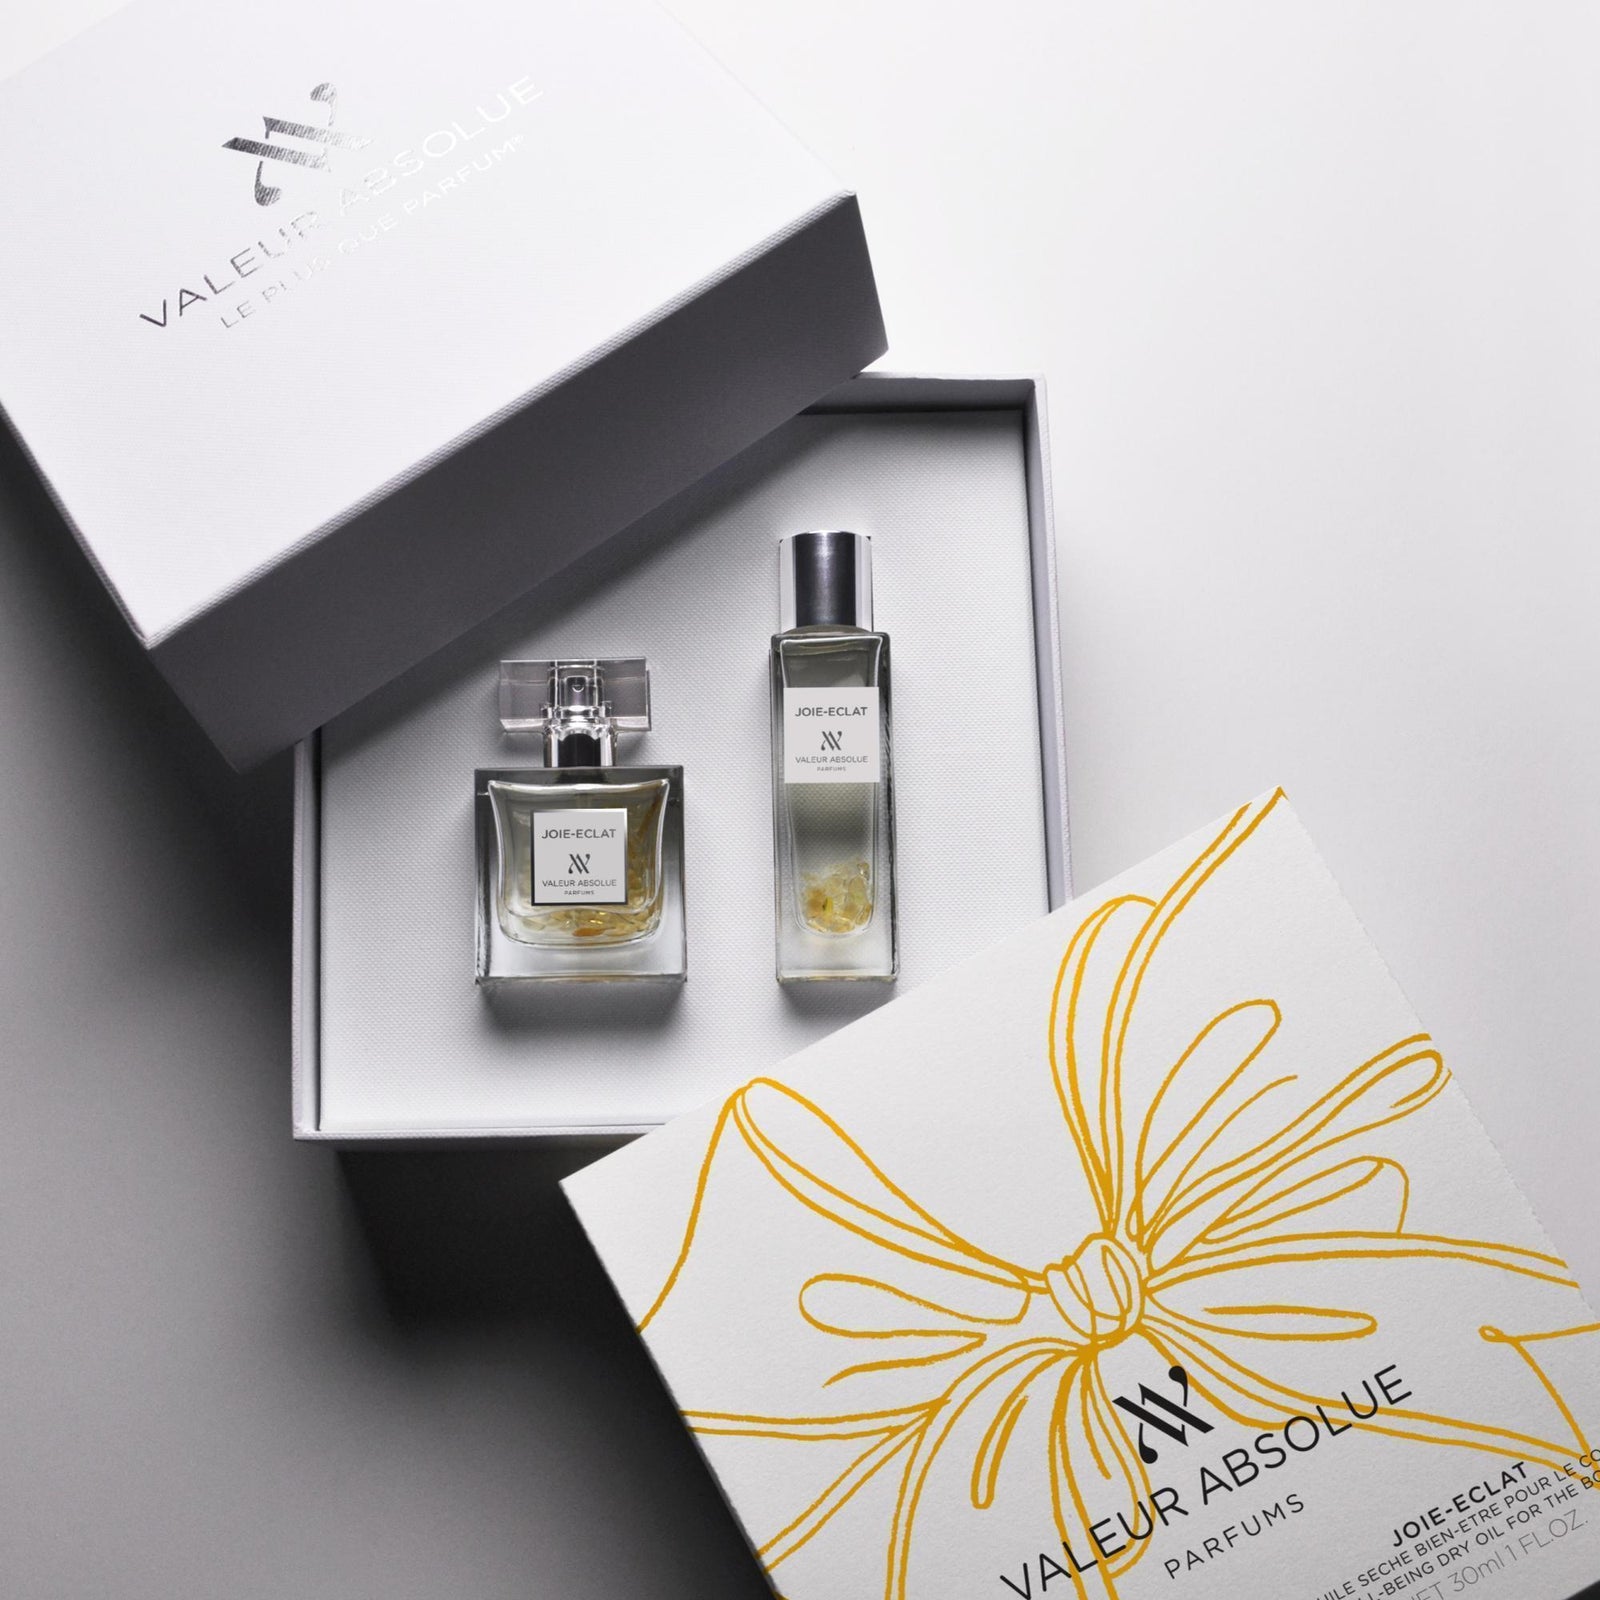 Valeur Absolue Classiques Gift Set, Sensualite - BEing WELL